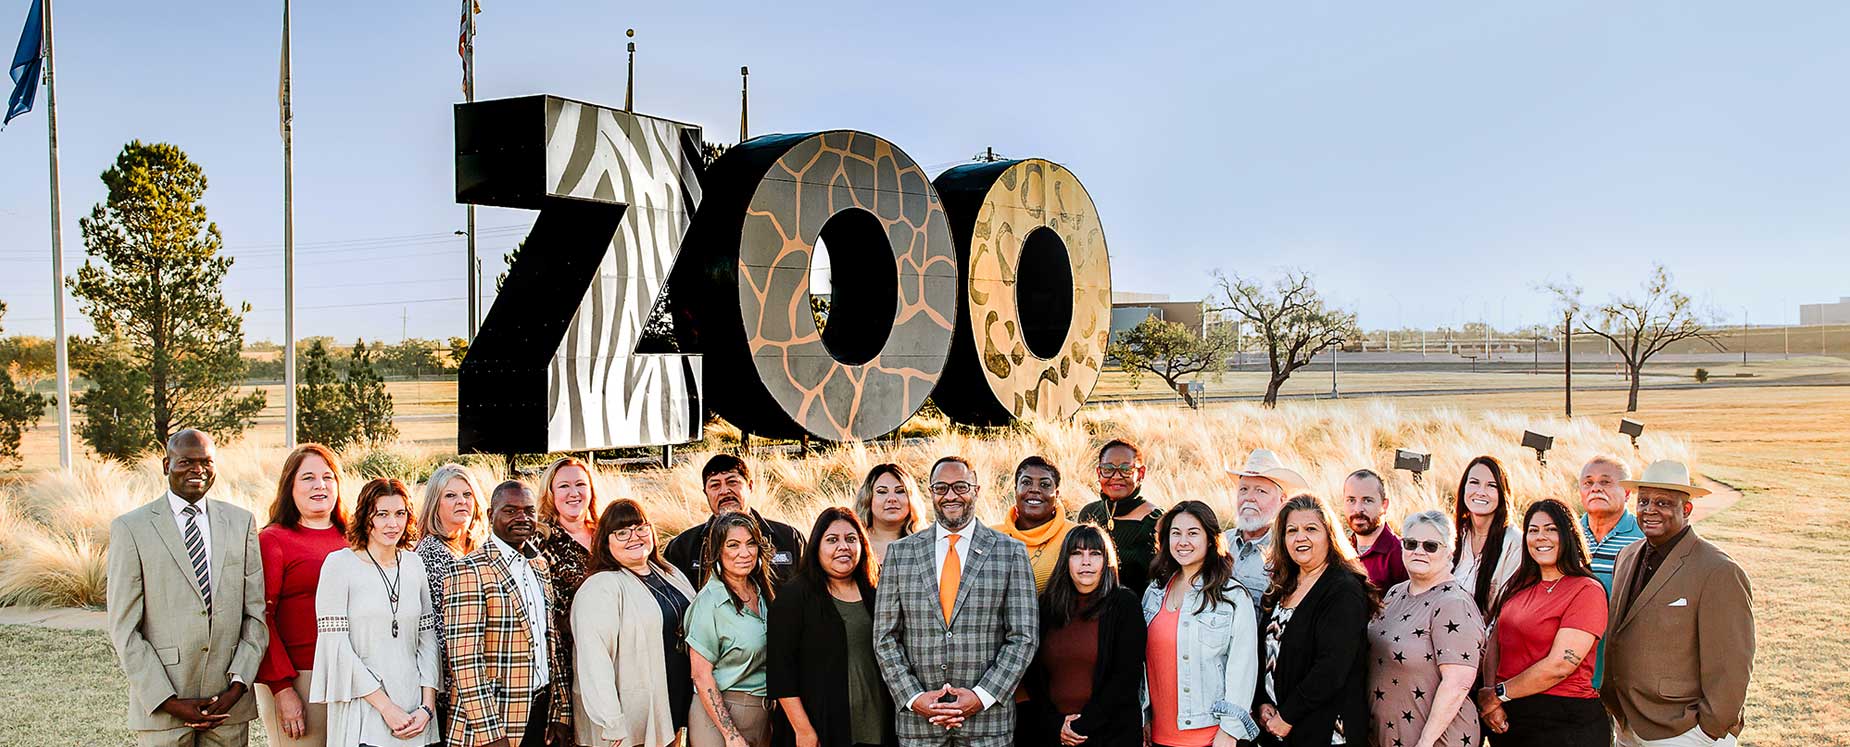 Abilene Housing AUthority Staff standing in front of Zoo sign